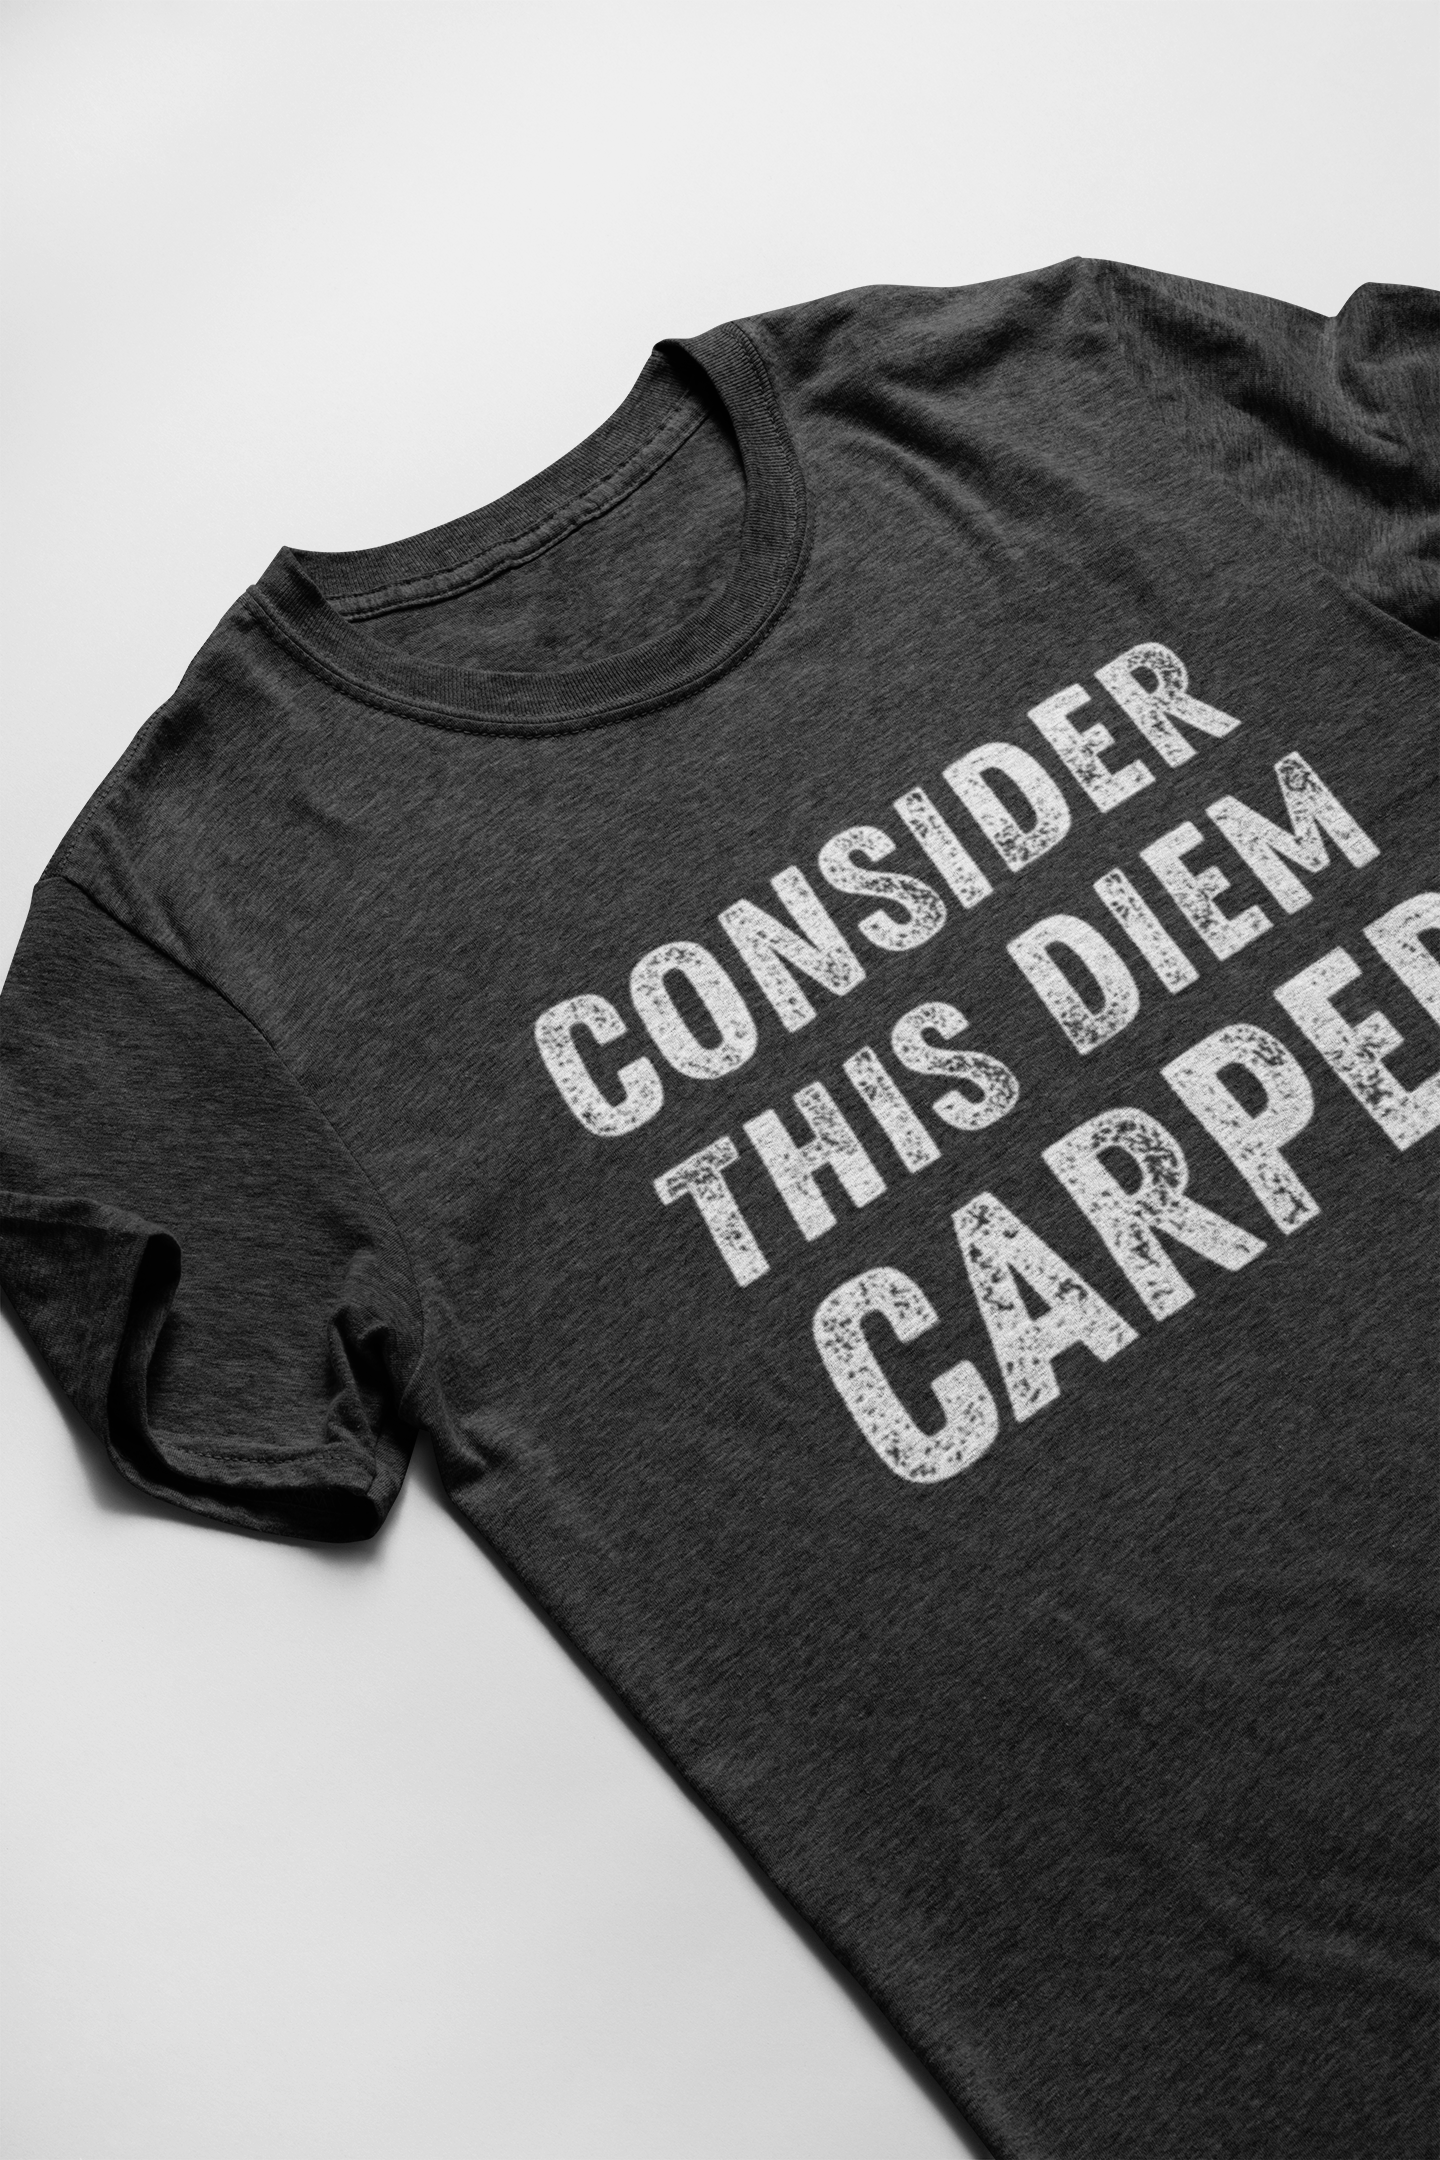 funny t shirt that says consider this diem carped